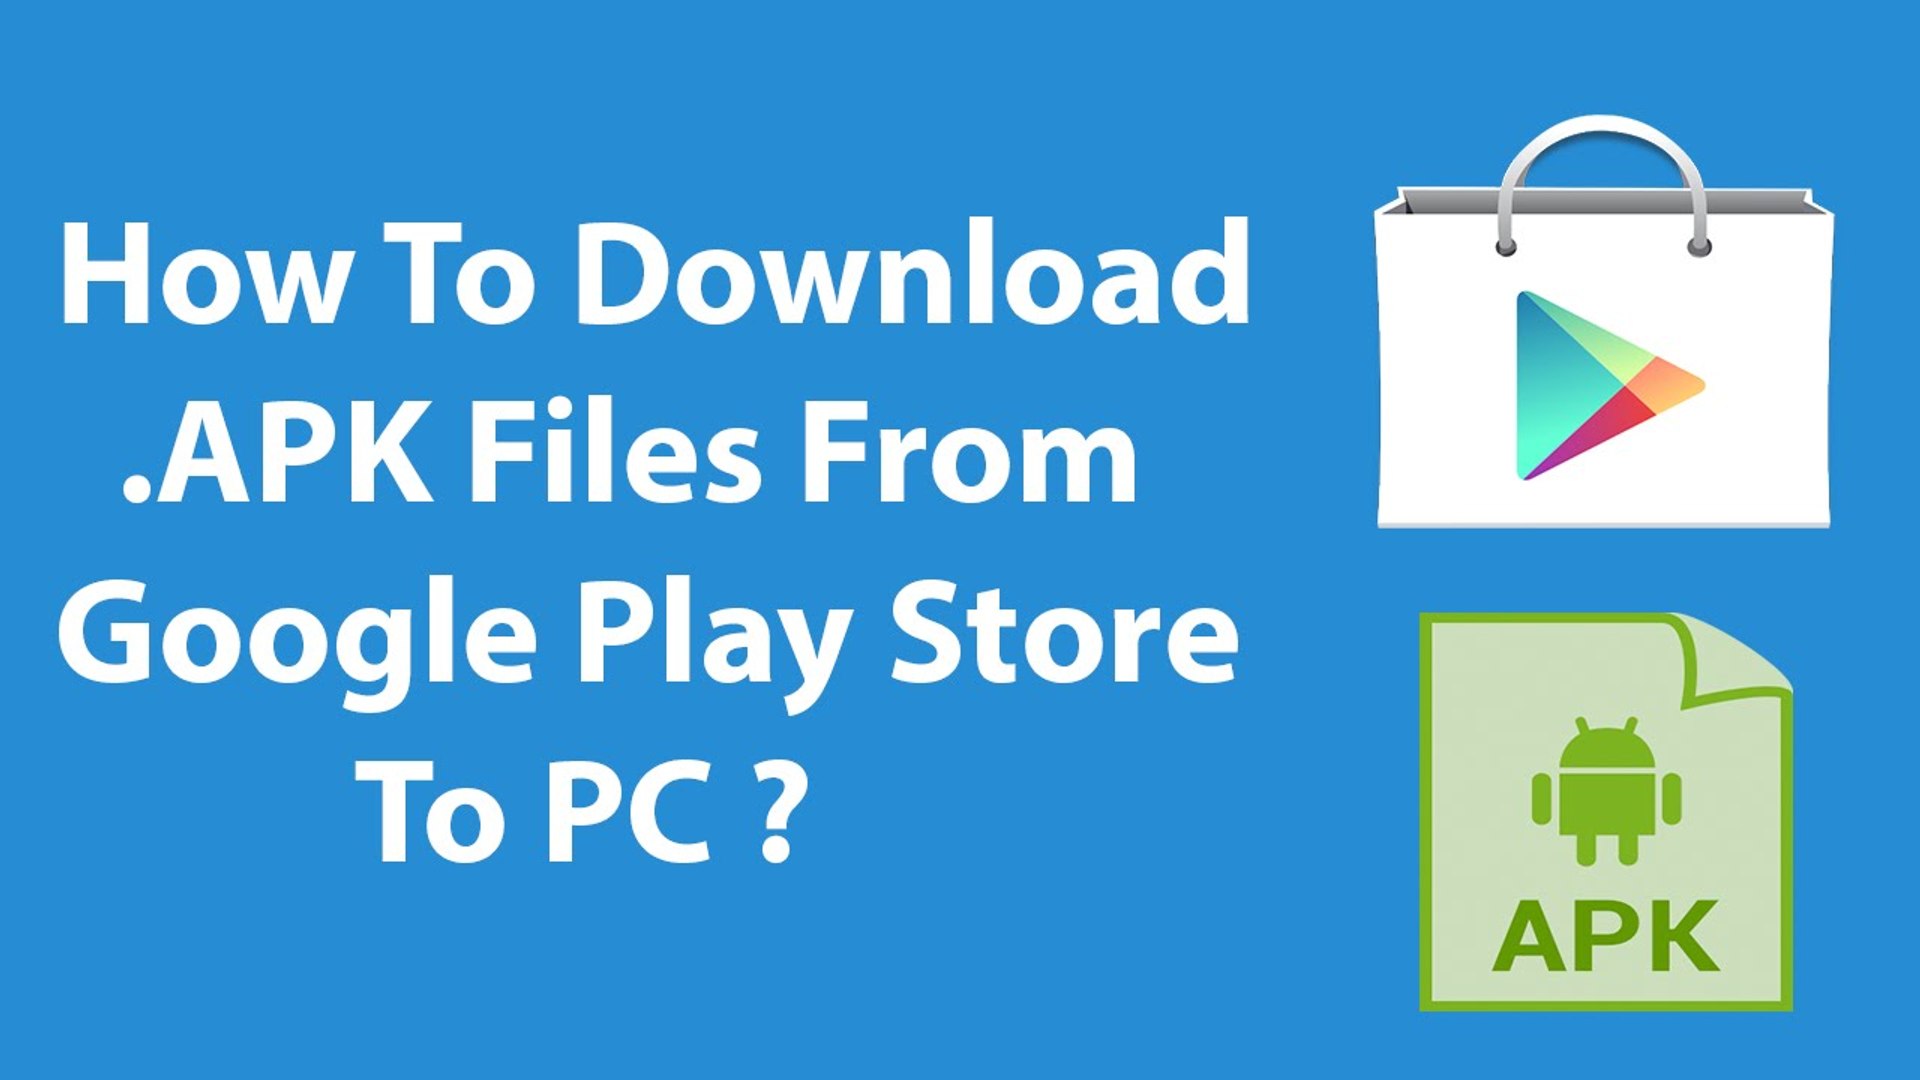 How To Download APK Files From Google Play Store To PC ? - video